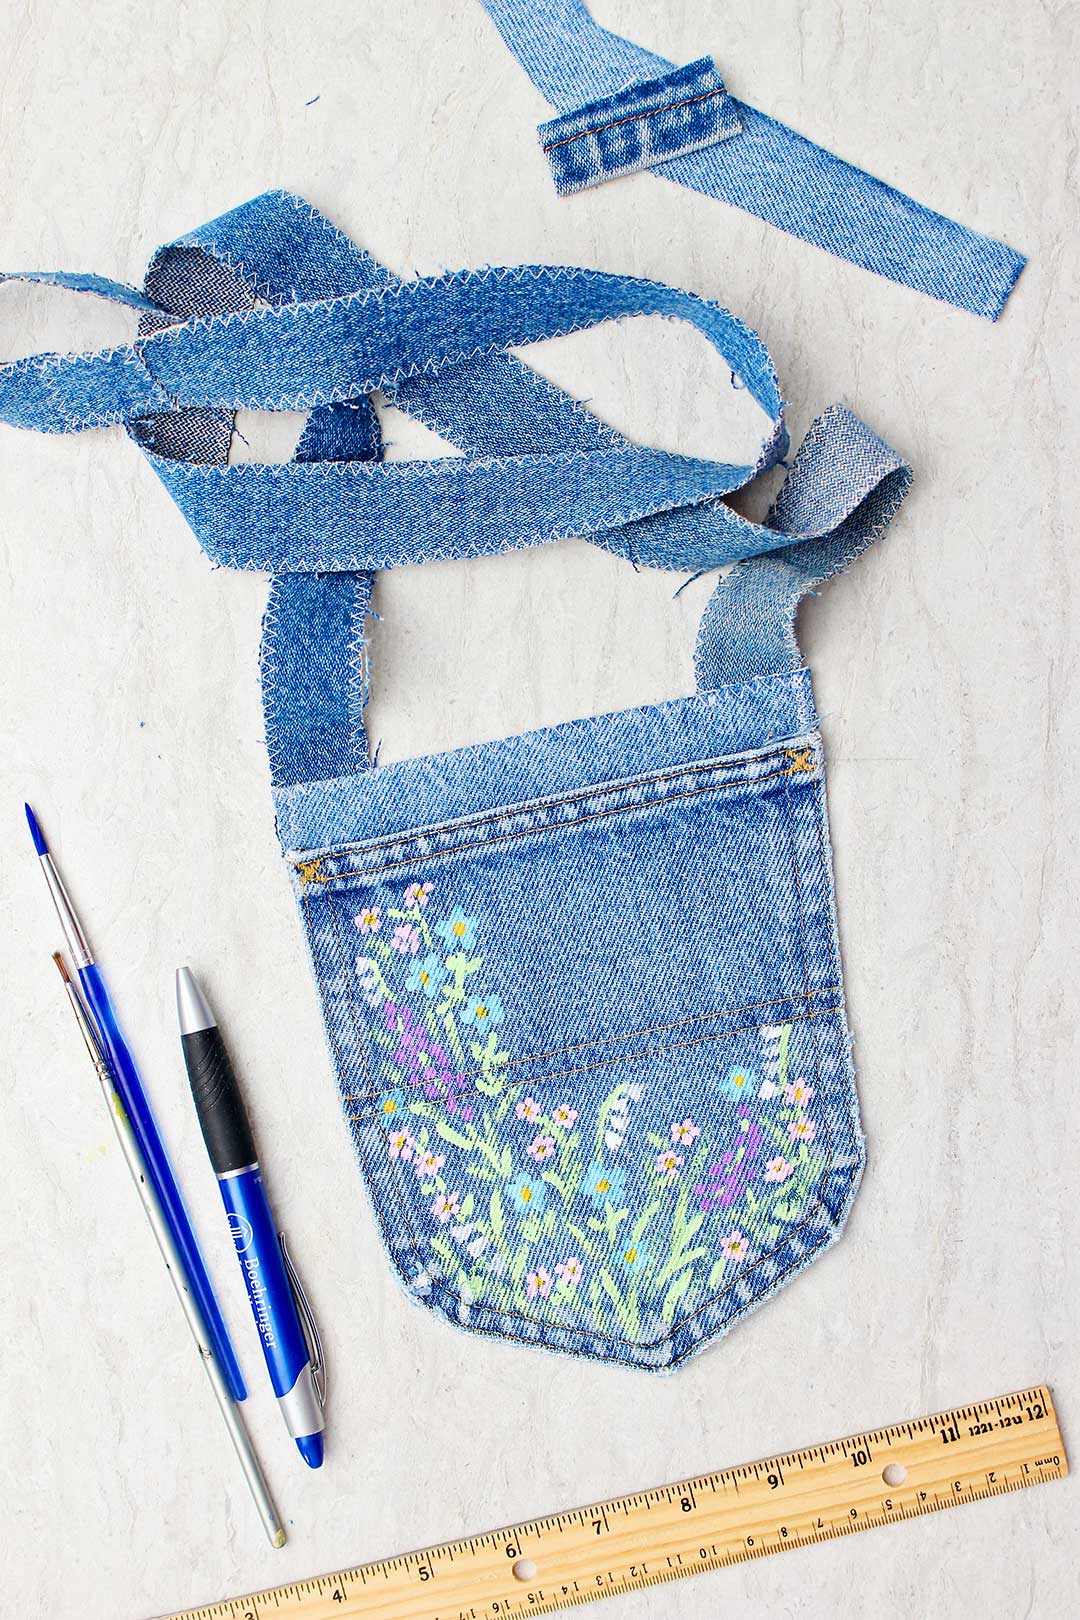 DIY Long Strip Bag Out Of Old Jeans - How To Make Casual Hand Bag Purse  From Old Denim - YouTube